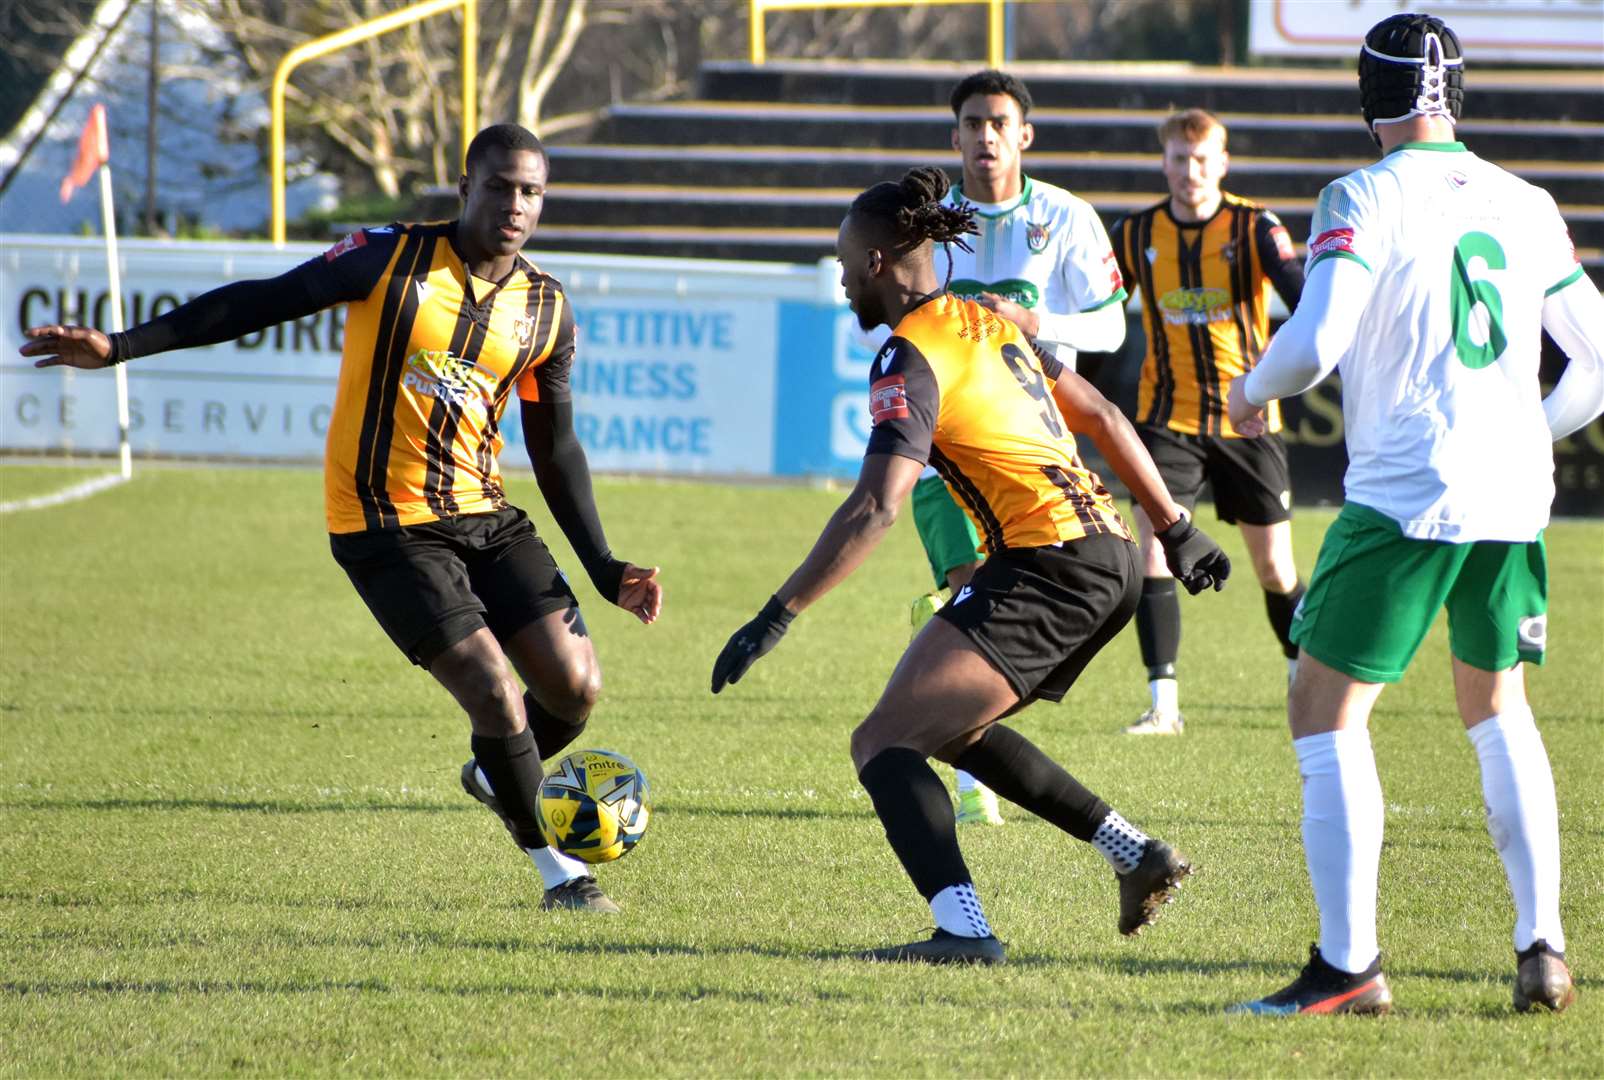 Striker Ade Yusuff tries to get the ball under his spell. Picture: Randolph File